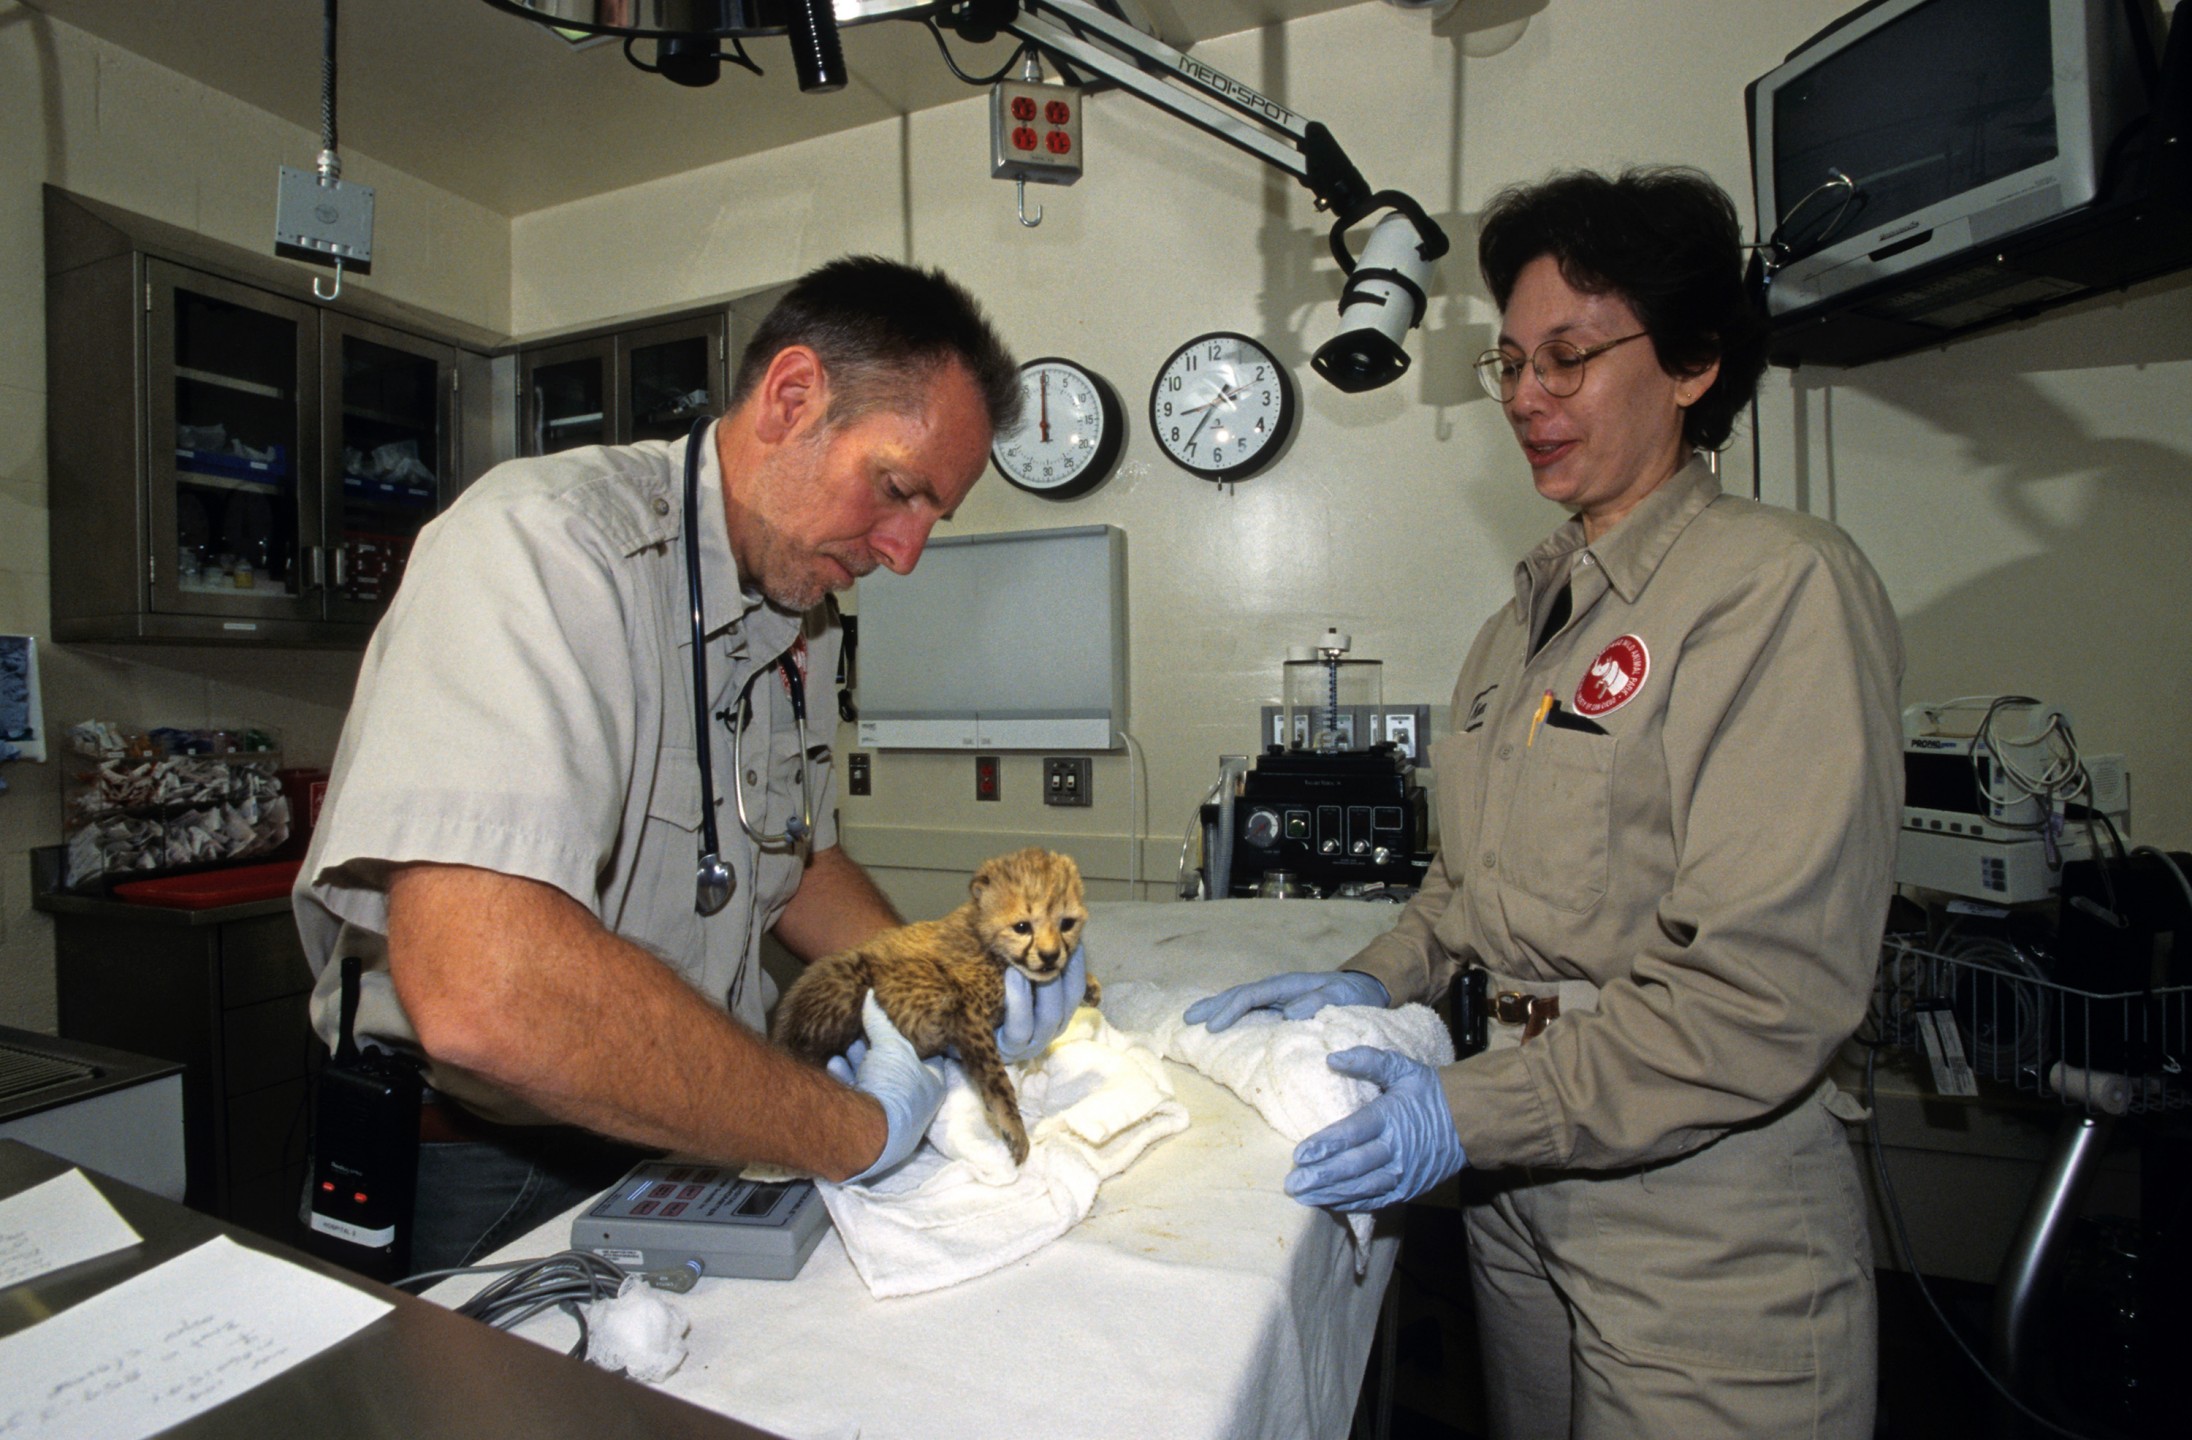 Veterinarian Dr. Jack Allen and keeper Karen Barnes check out a cheetah cub in the new Harter Veterinary Medical Center. With the new center, every patient from the smallest to the largest had the best facilities and equipment available to provide for their health care.